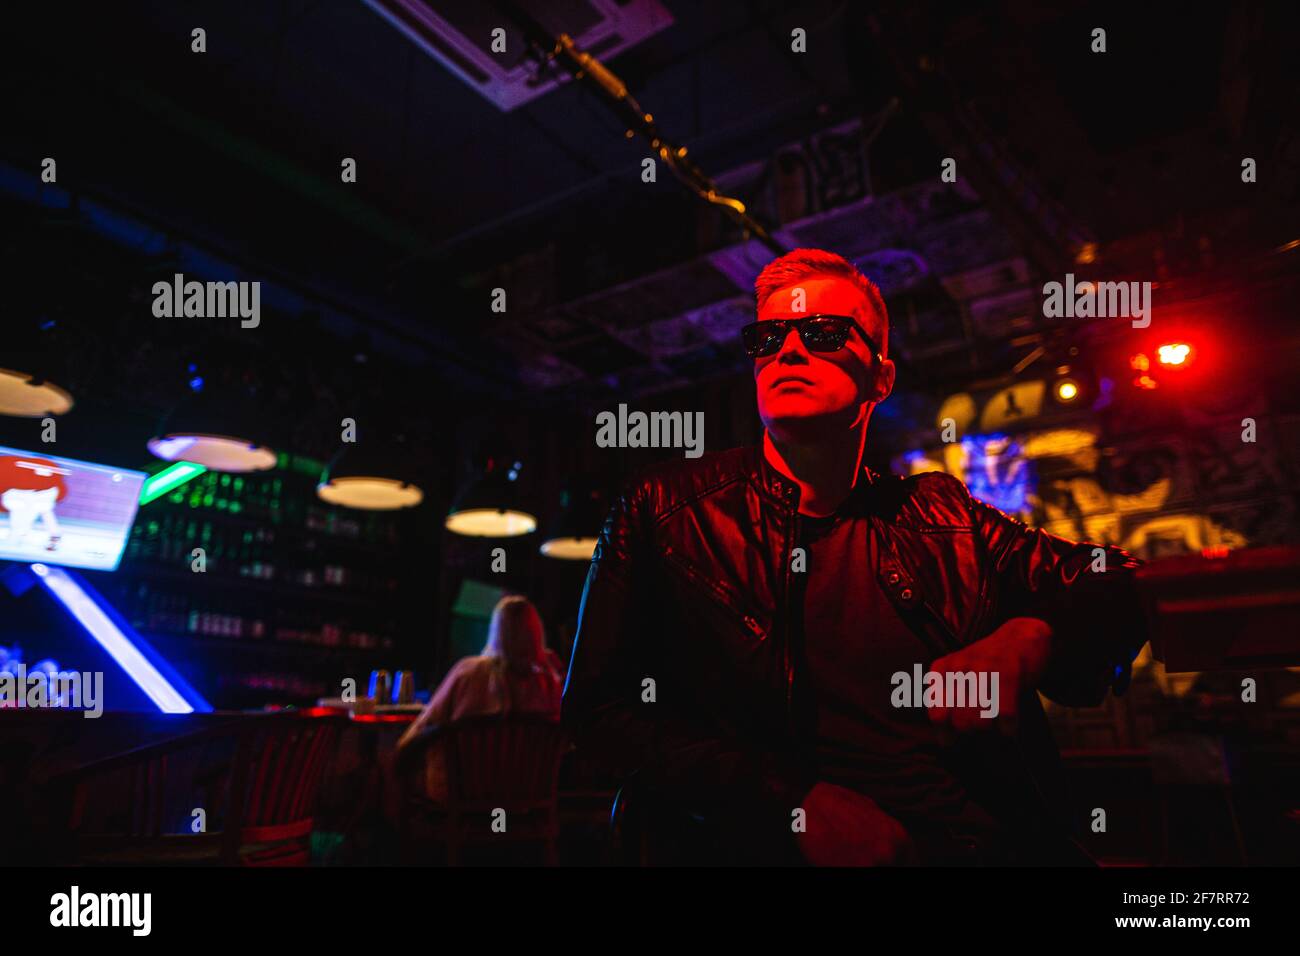 Handsome man in leather jacket with sunglasses and neon lights. Stock Photo